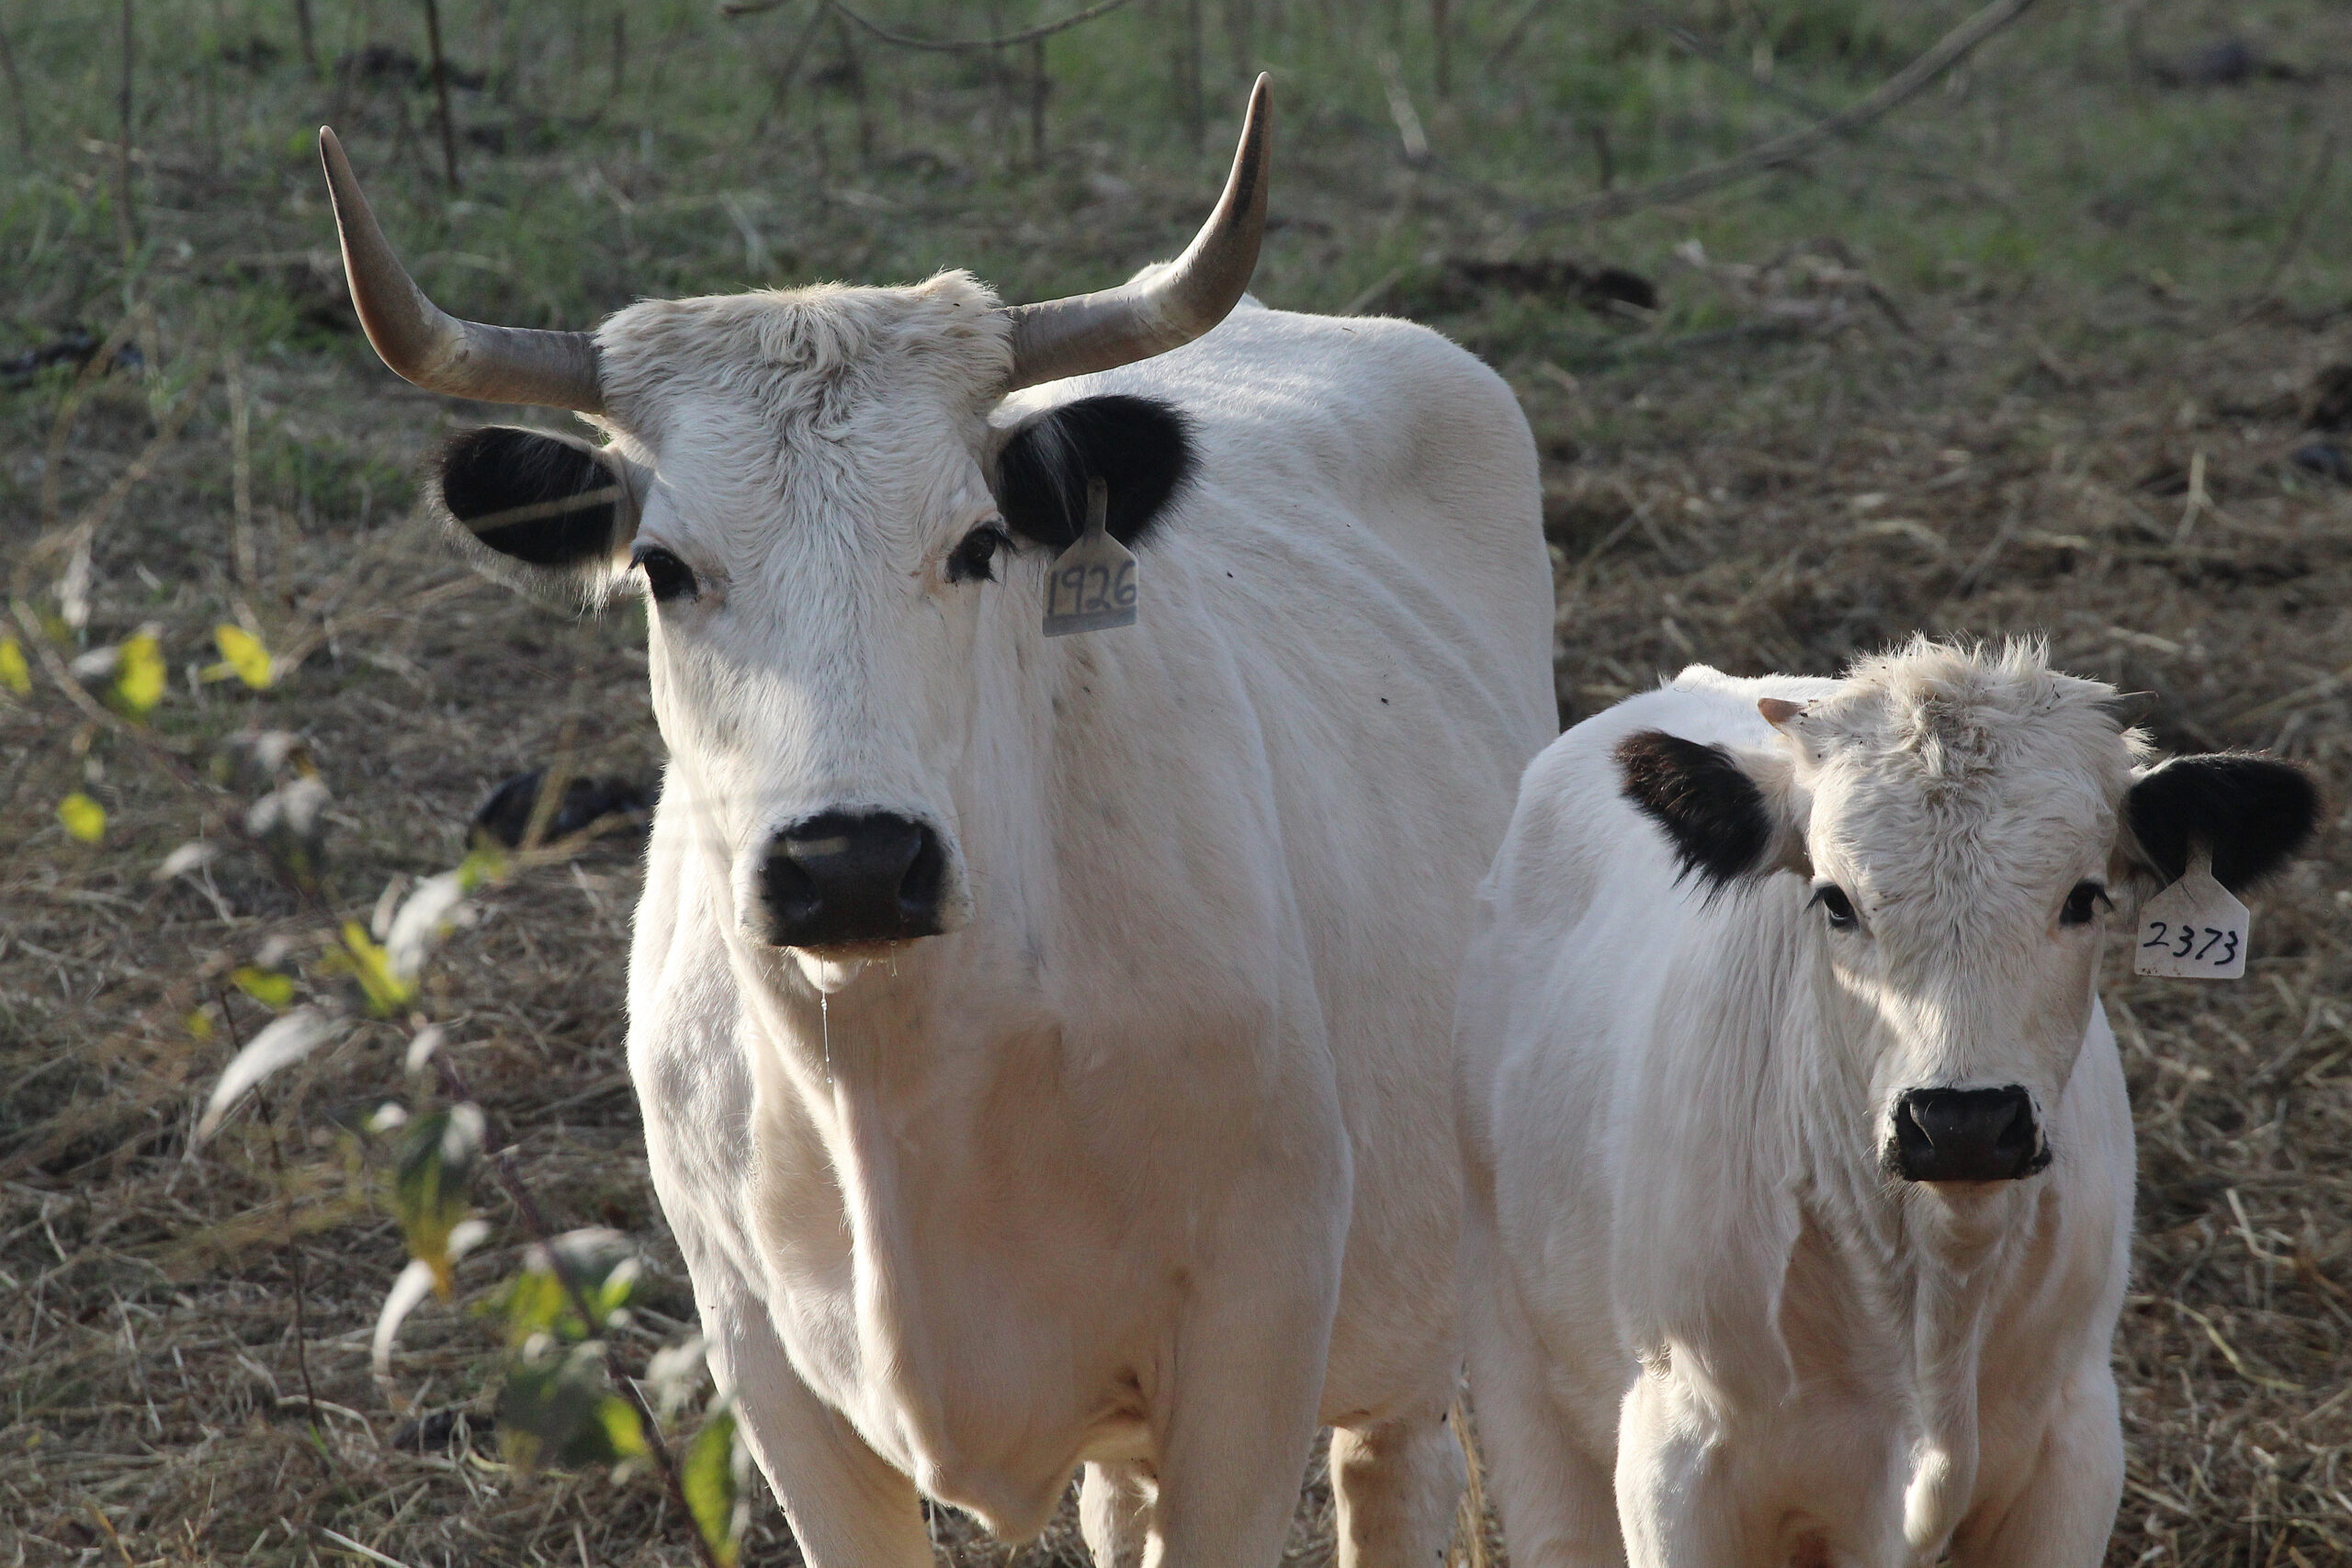 A white cow and calf stand next to each other and look at the camera